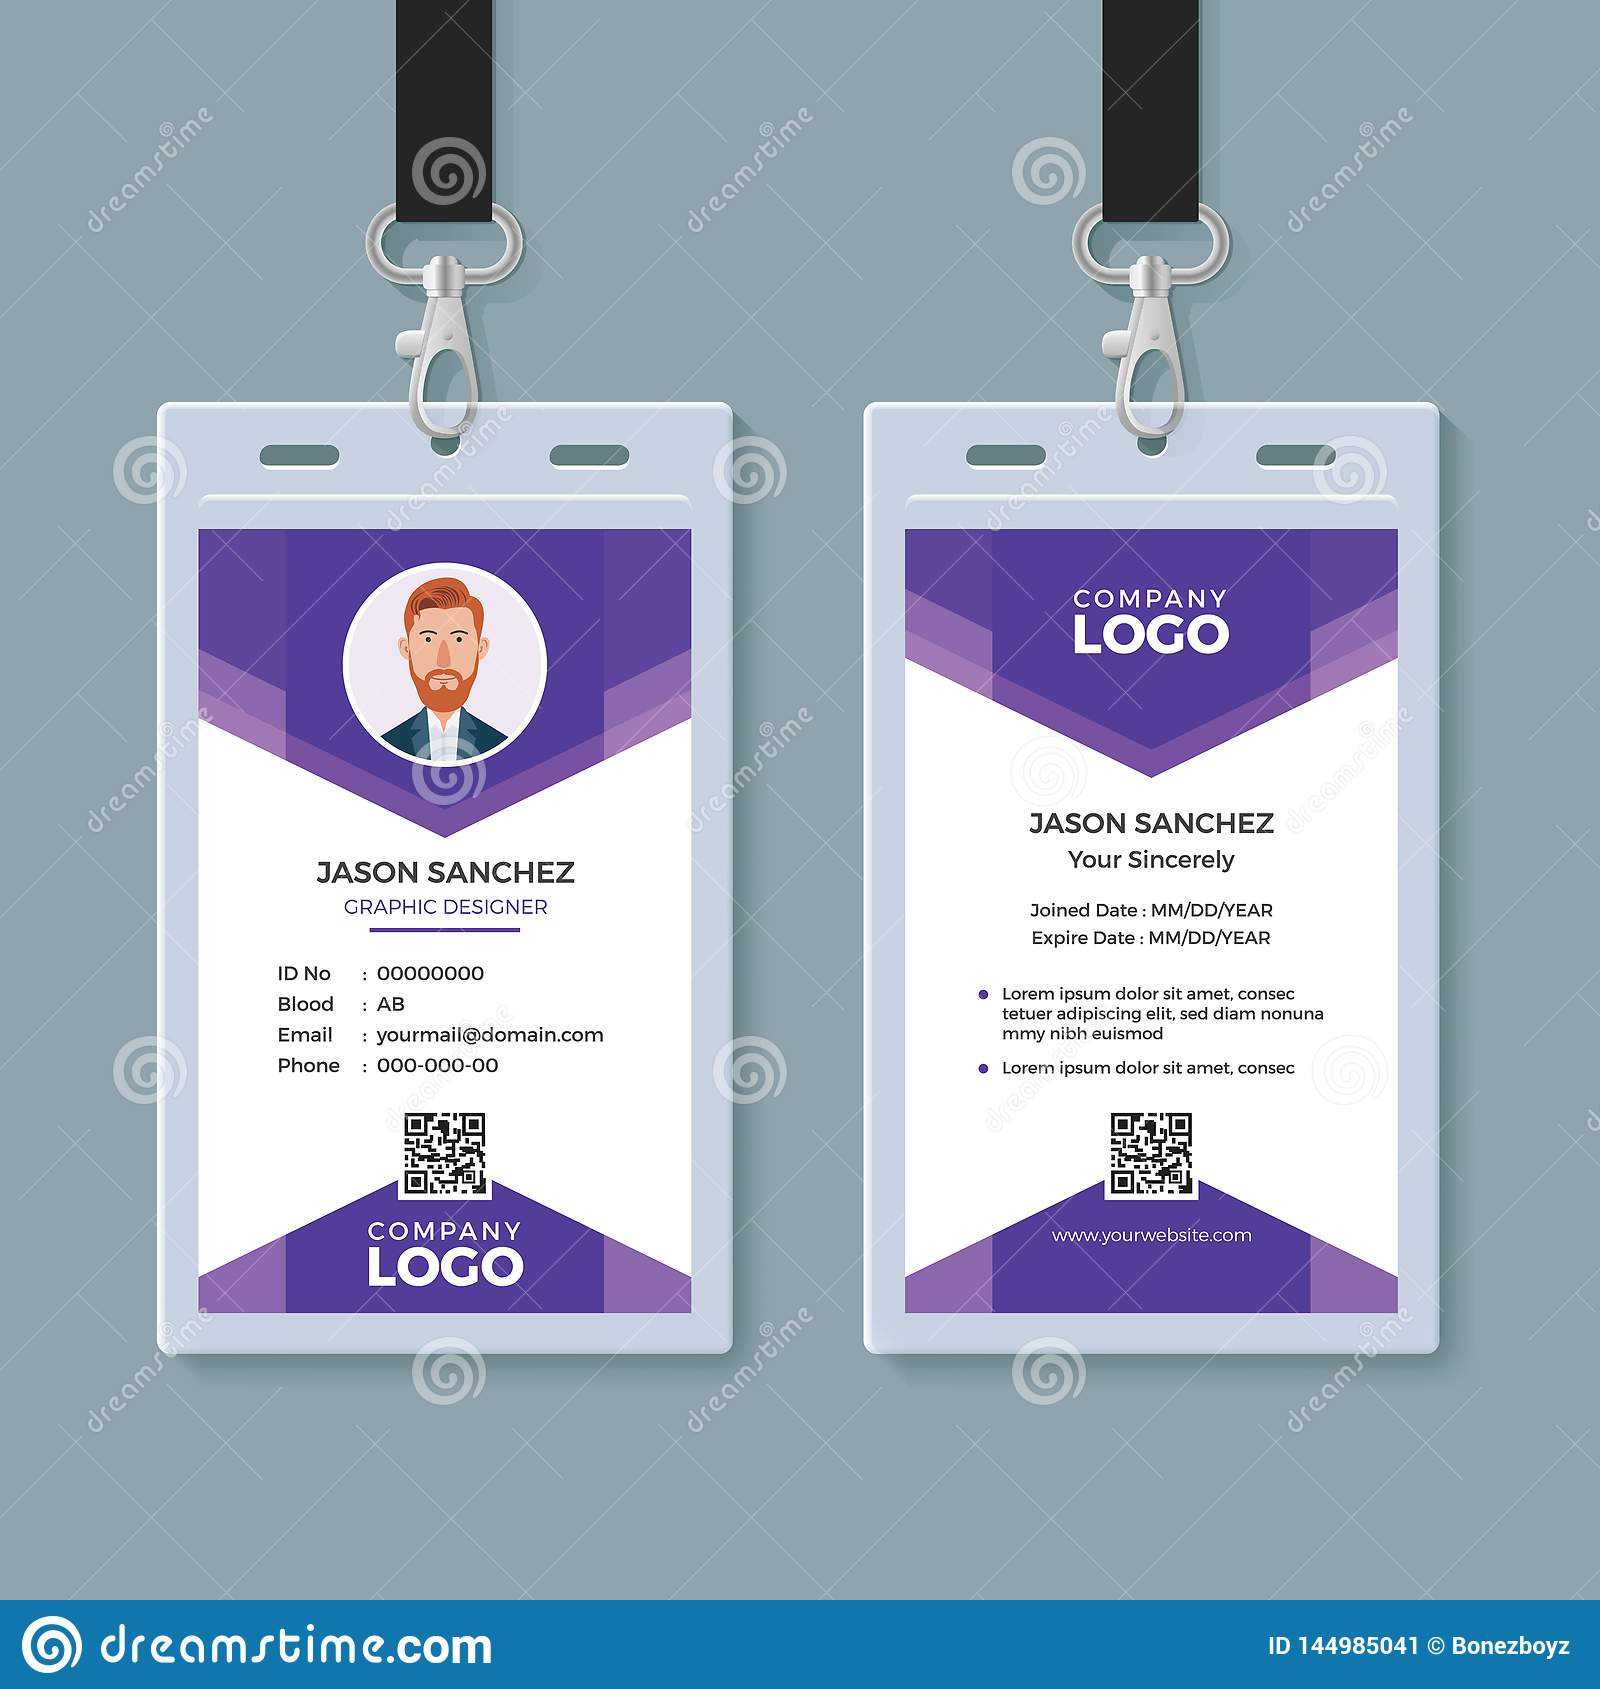 Creative Id Card Template Stock Vector. Illustration Of With Conference Id Card Template